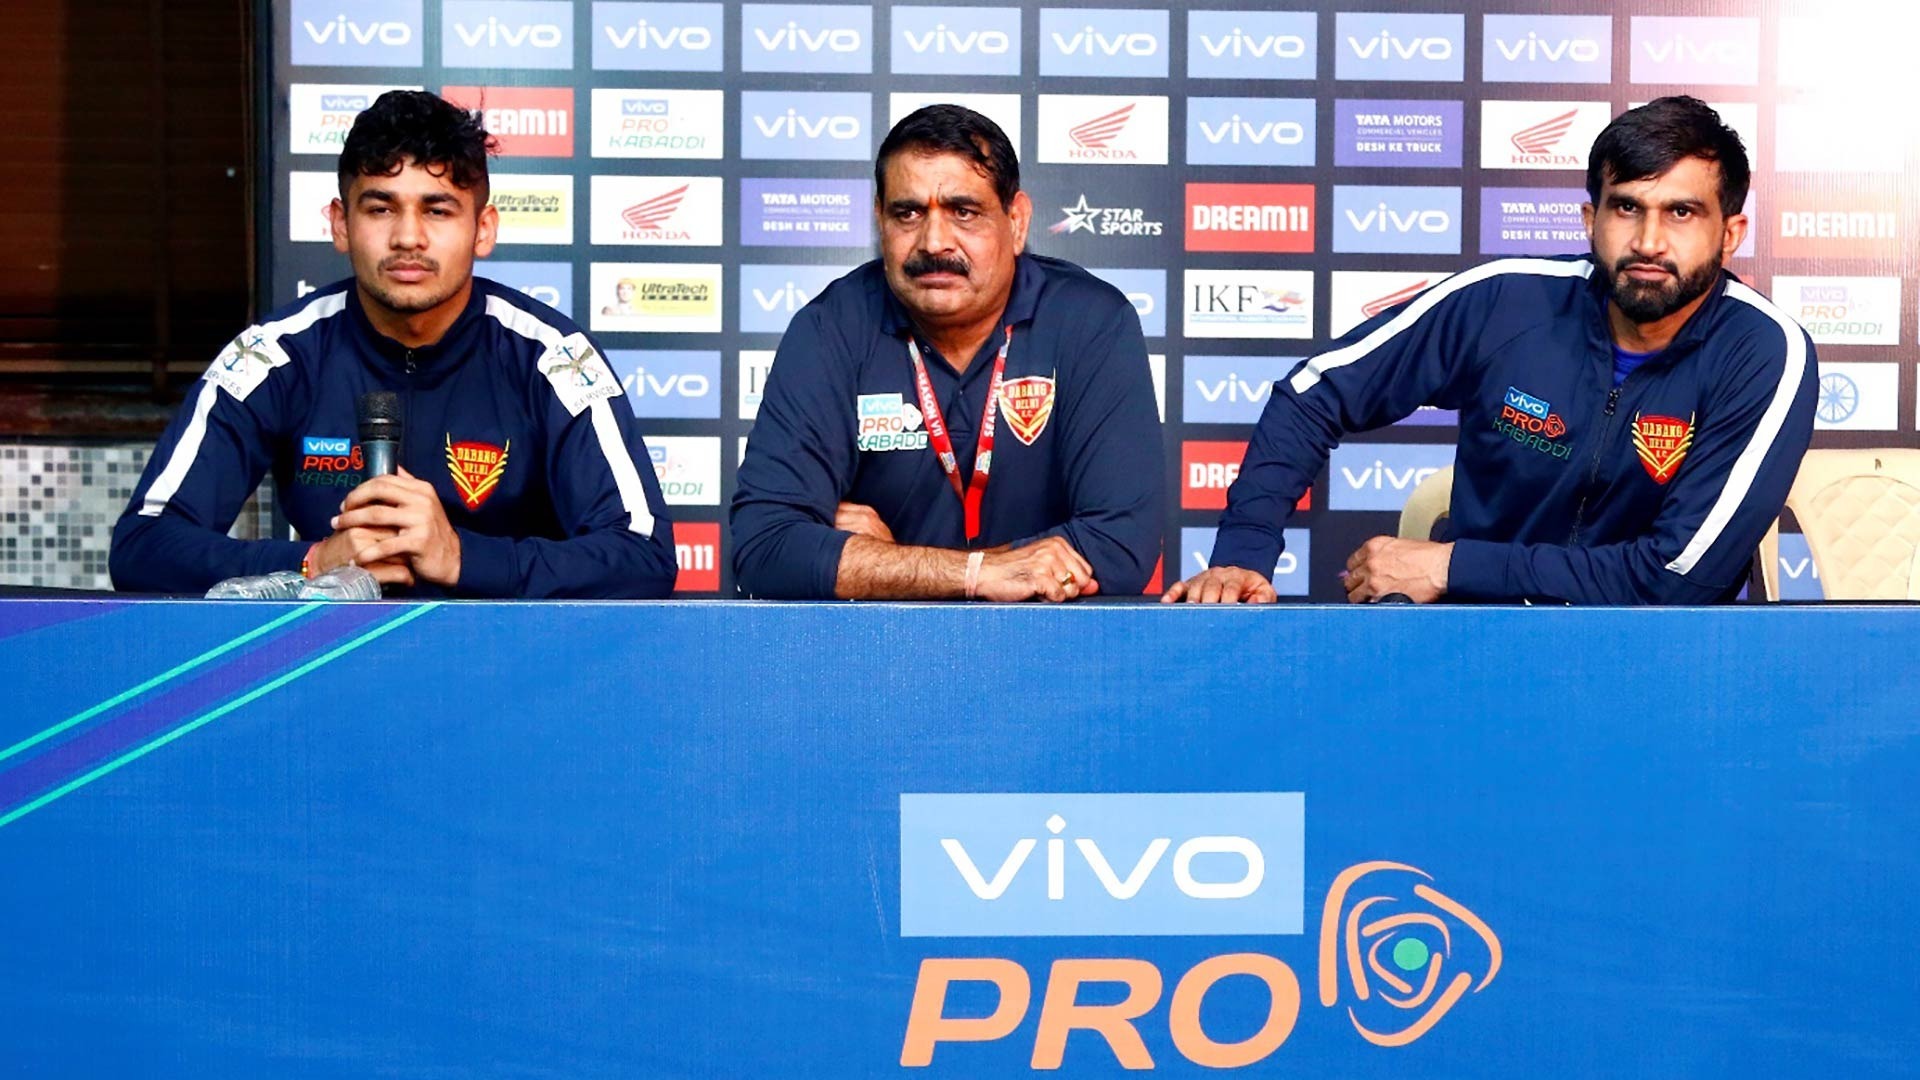 PKL 2019 | All 12 teams are evenly matched so a win against any team is a great result, believes Krishan Kumar Hooda